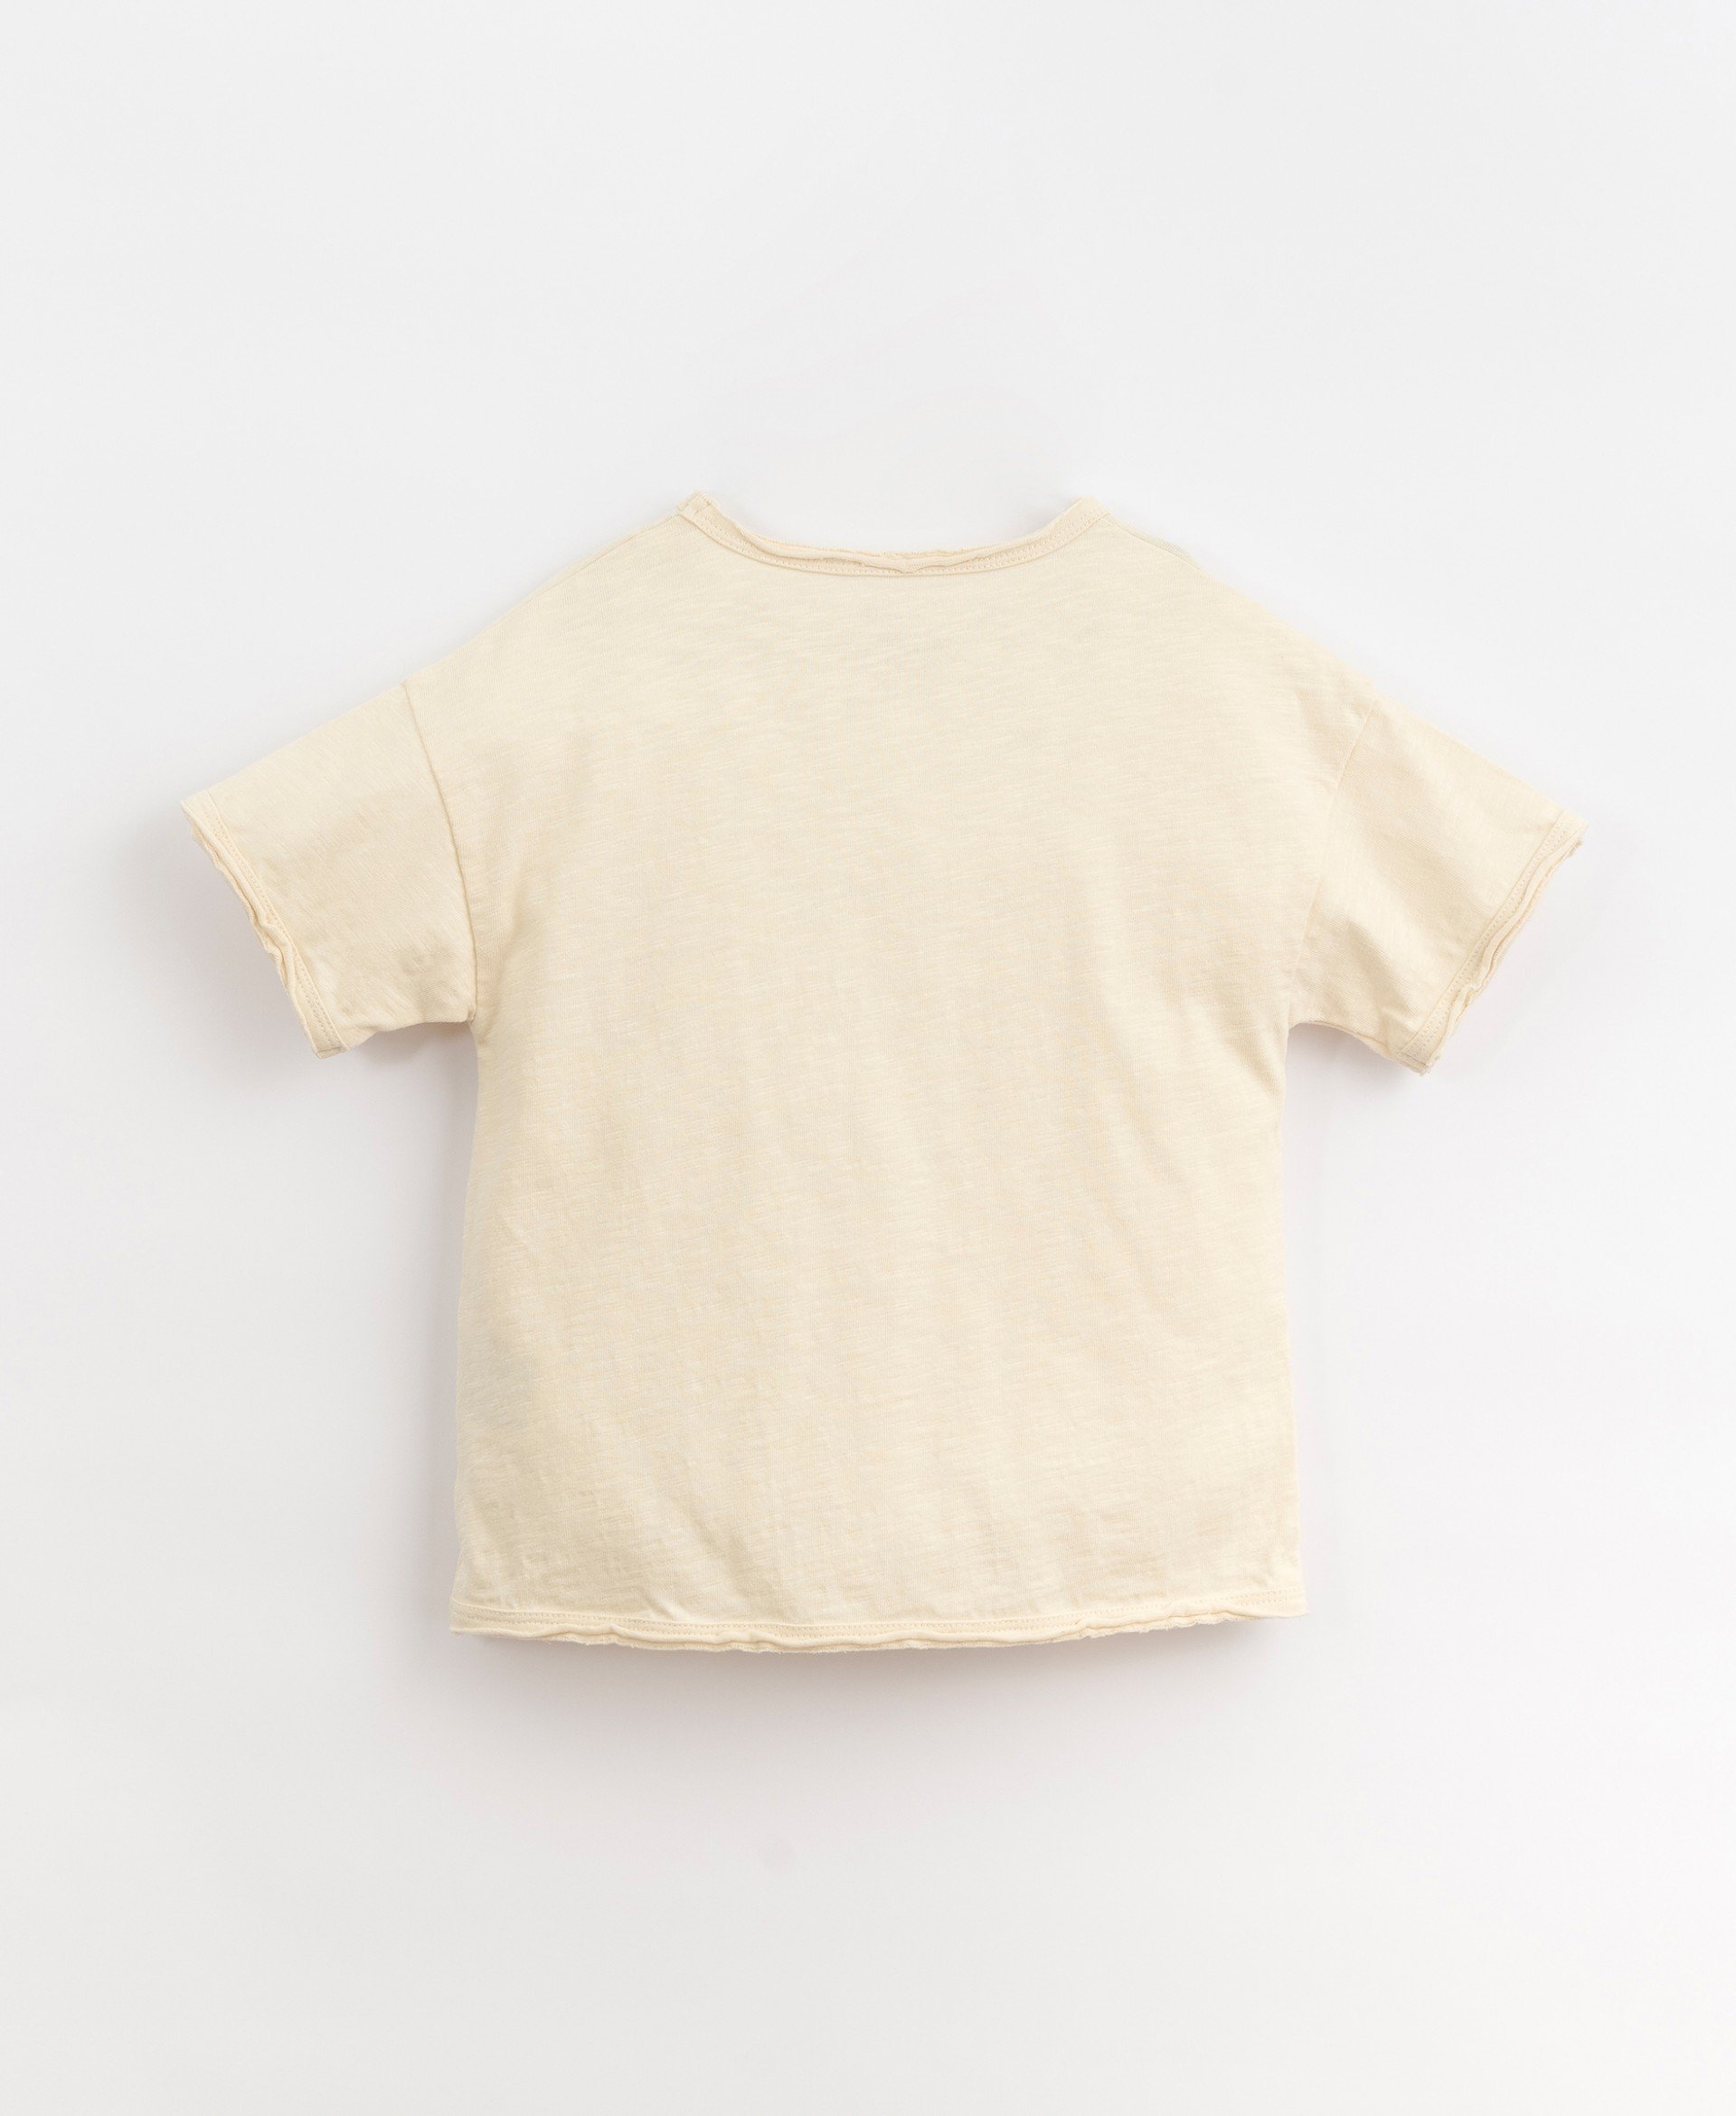 T-shirt with sharp-cut details | Organic Care